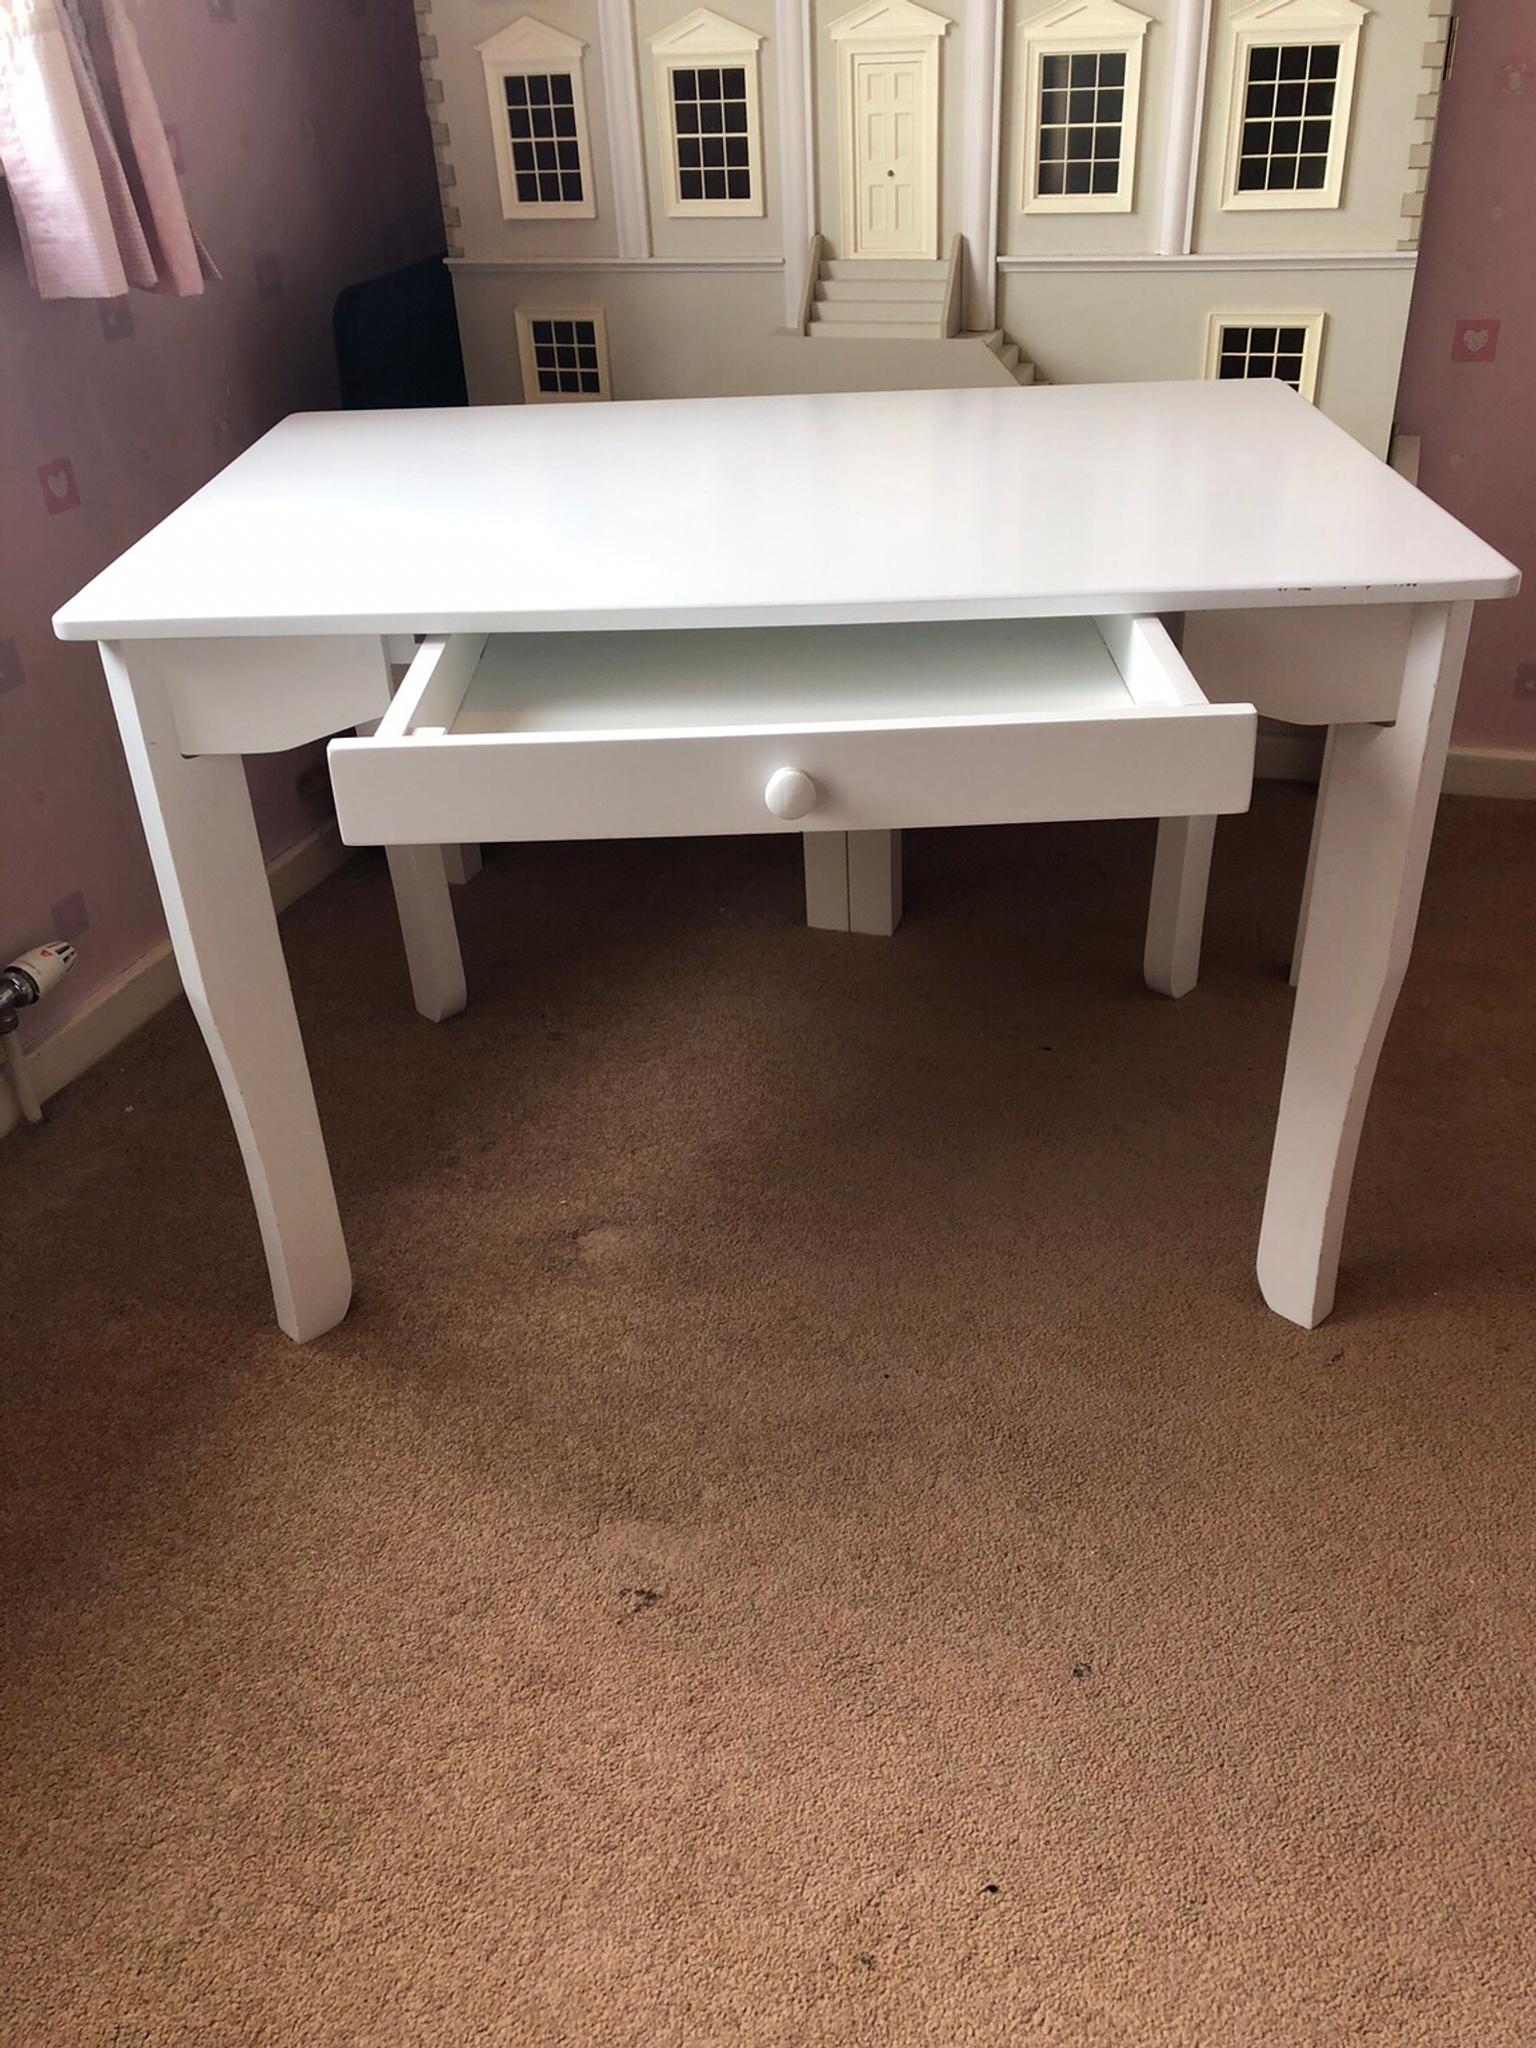 Used Child S White Wooden Desk And Drawer In Ng9 Broxtowe For